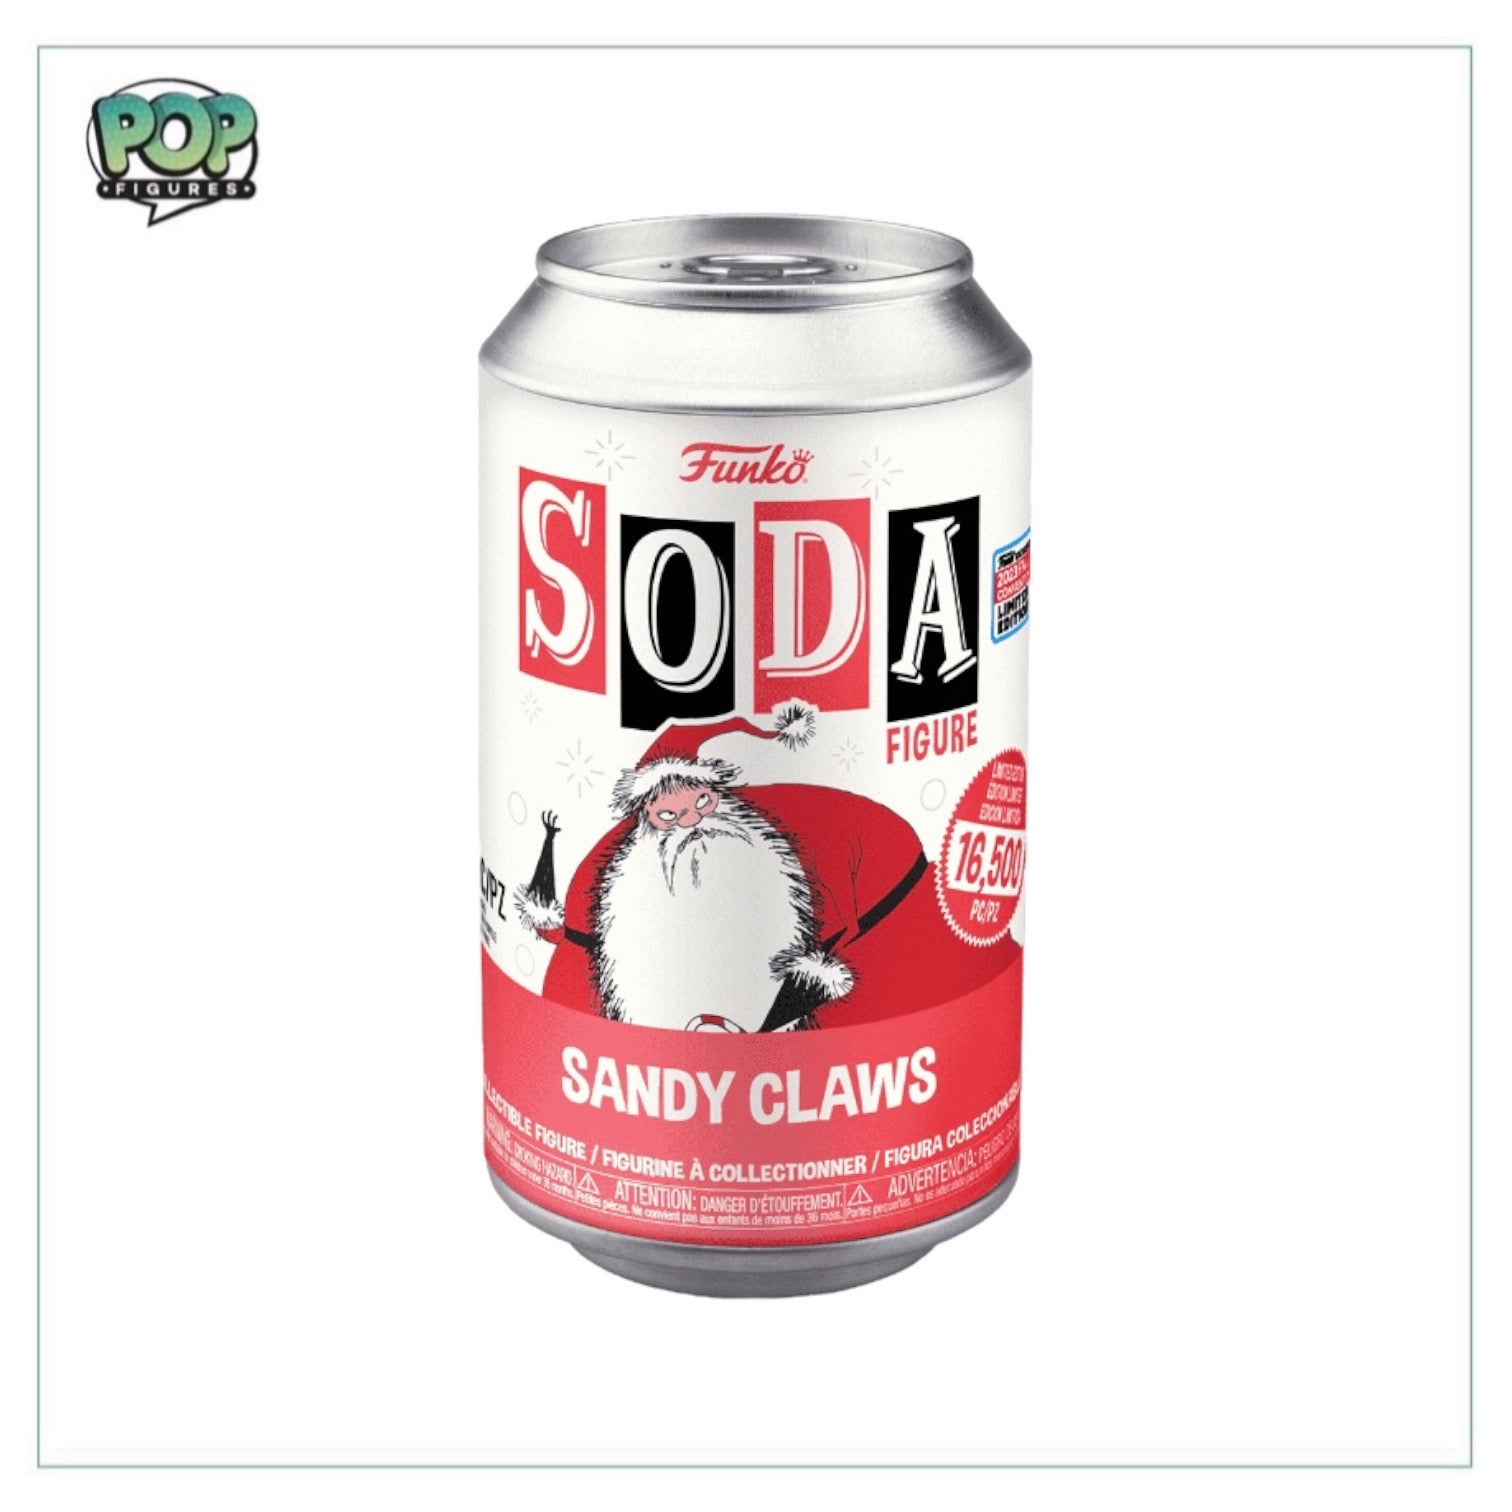 Sandy Claws Funko Soda Vinyl Figure! - The Nightmare Before Christmas - NYCC 2023 Shared Exclusive LE16500 Pcs - Chance of Chase